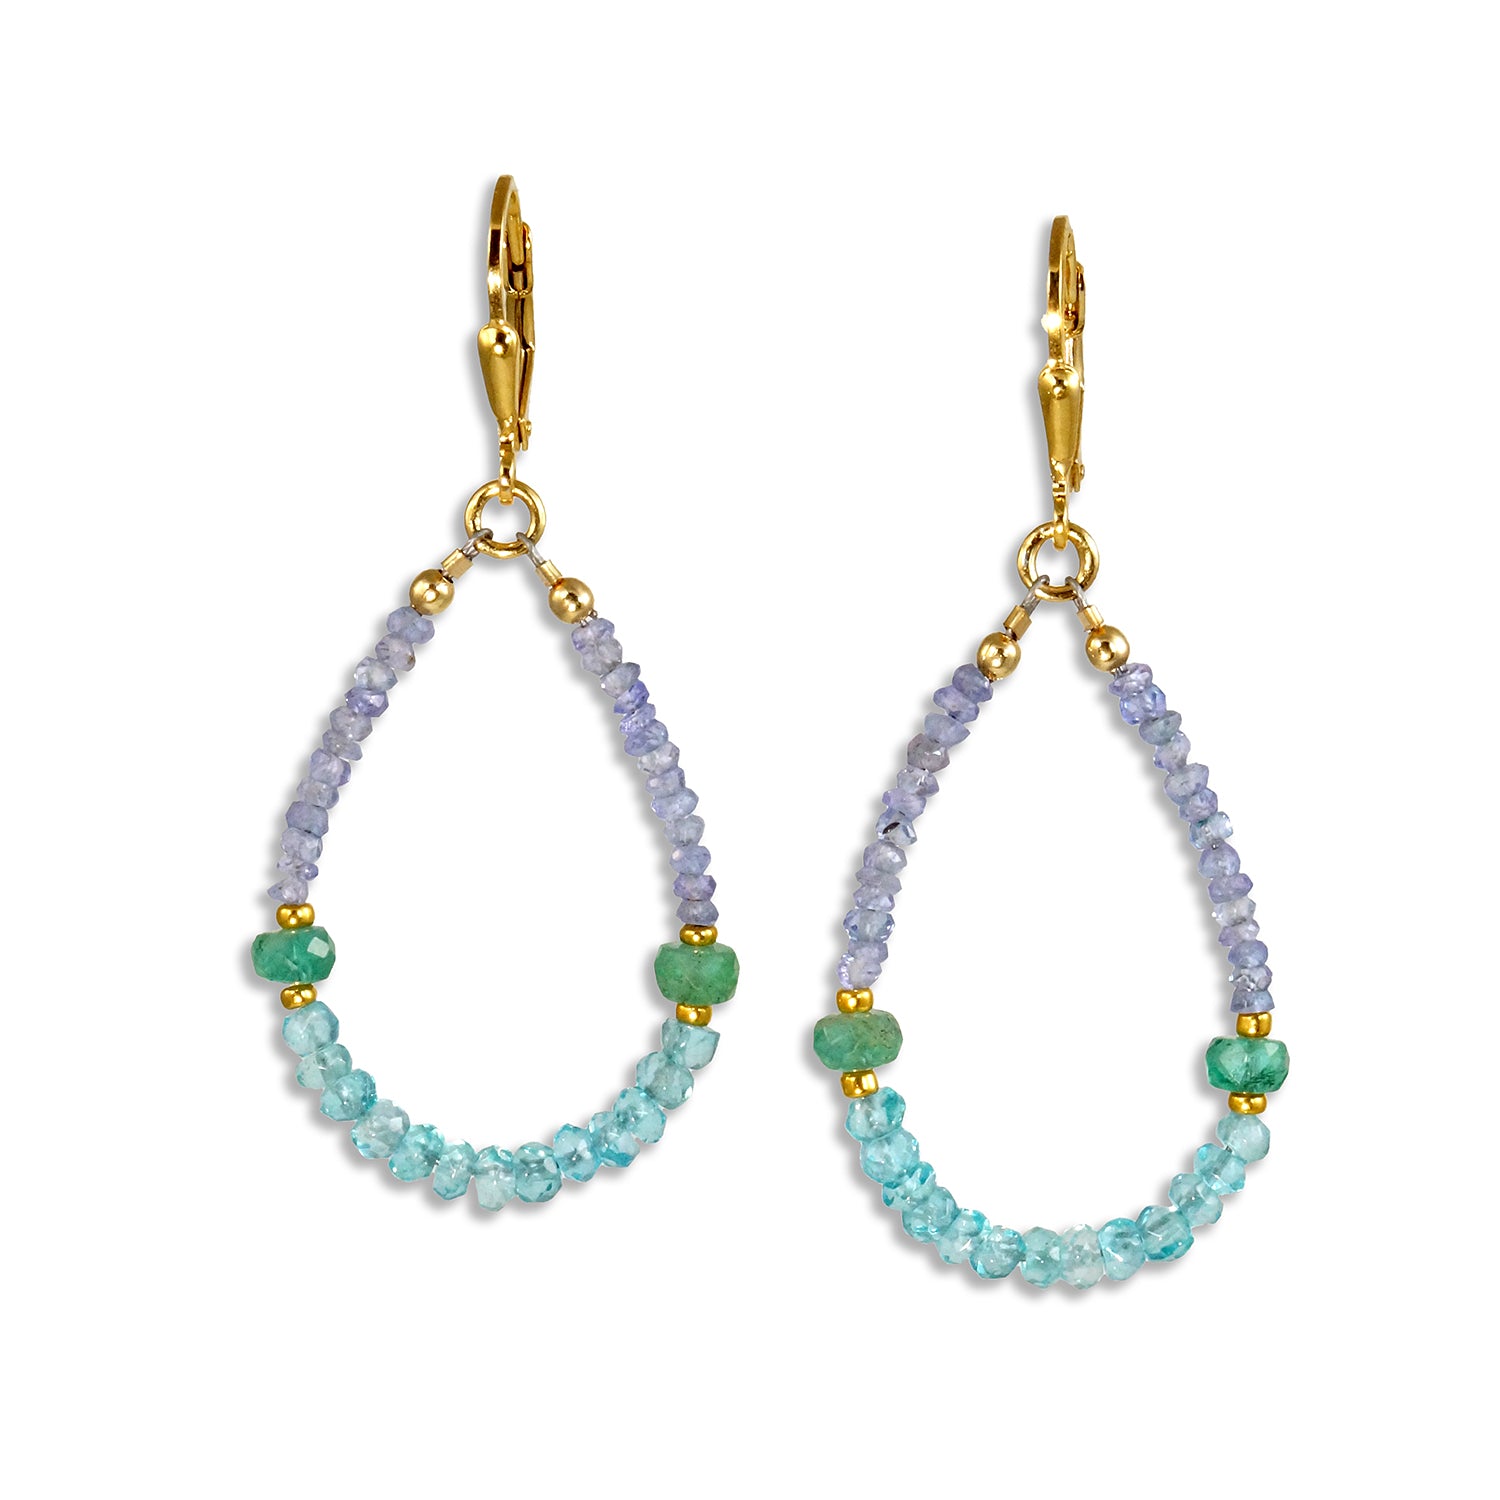 Gold Leverback Earrings with Emerald, Apatite, Tanzanite